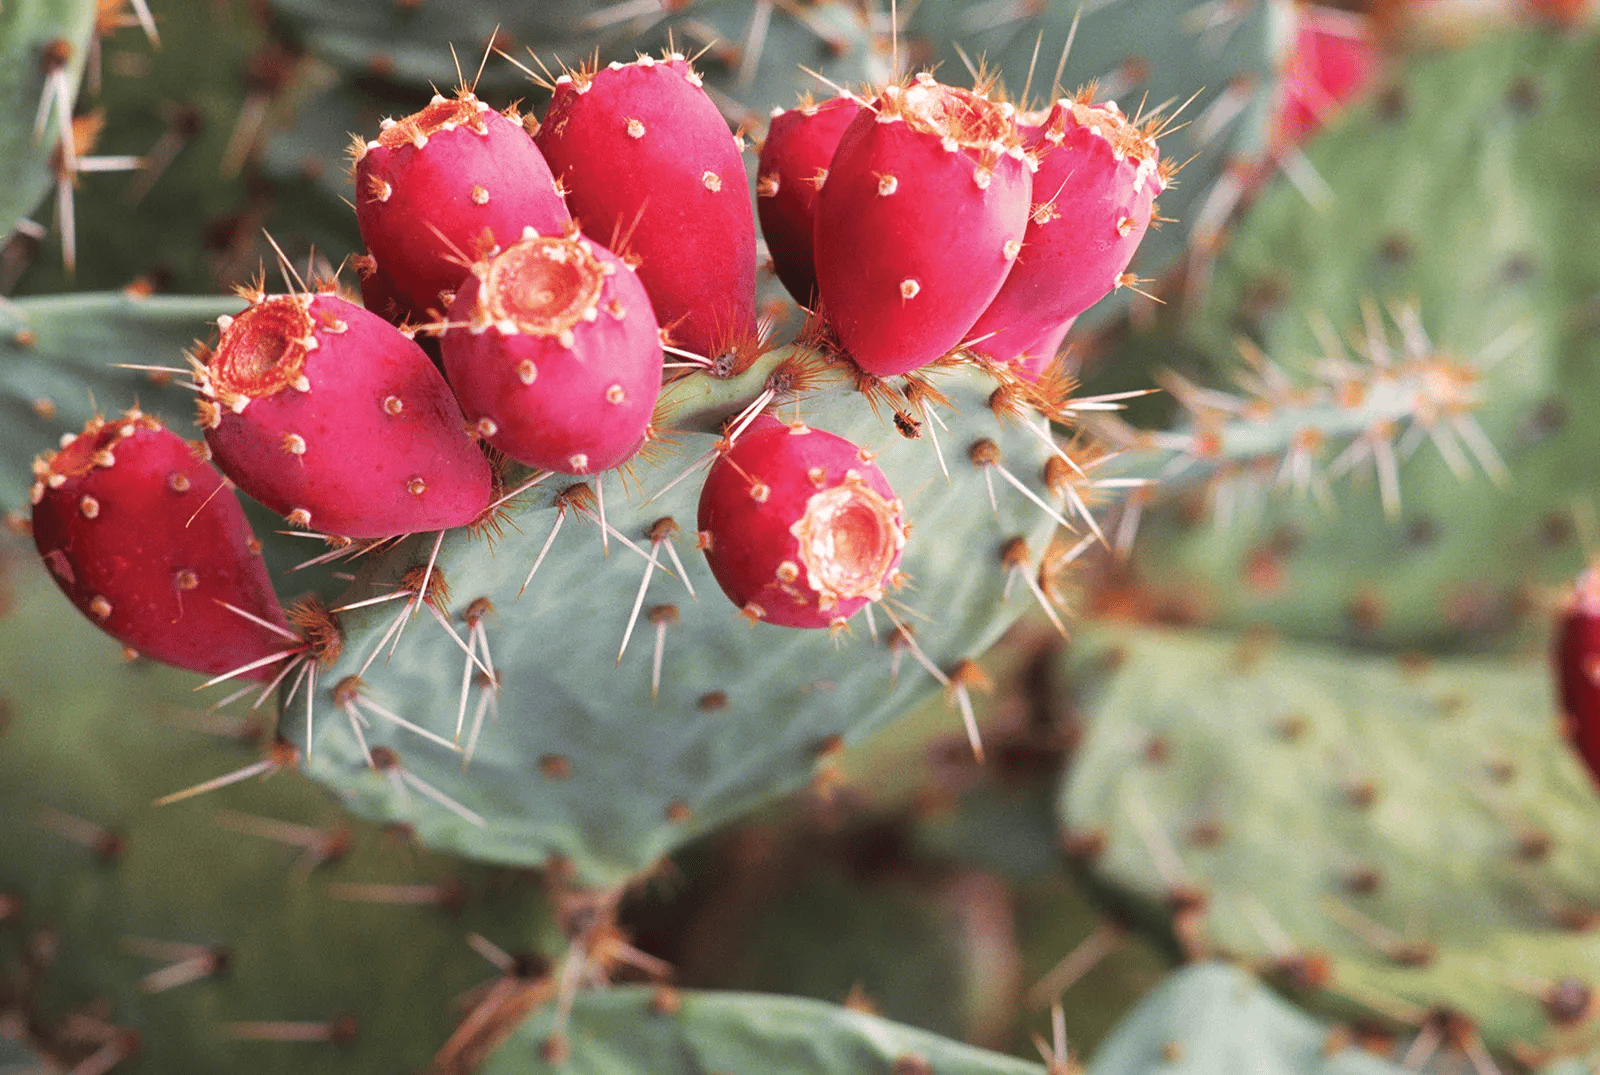 Prickly Pear (Opuntia Spp.)